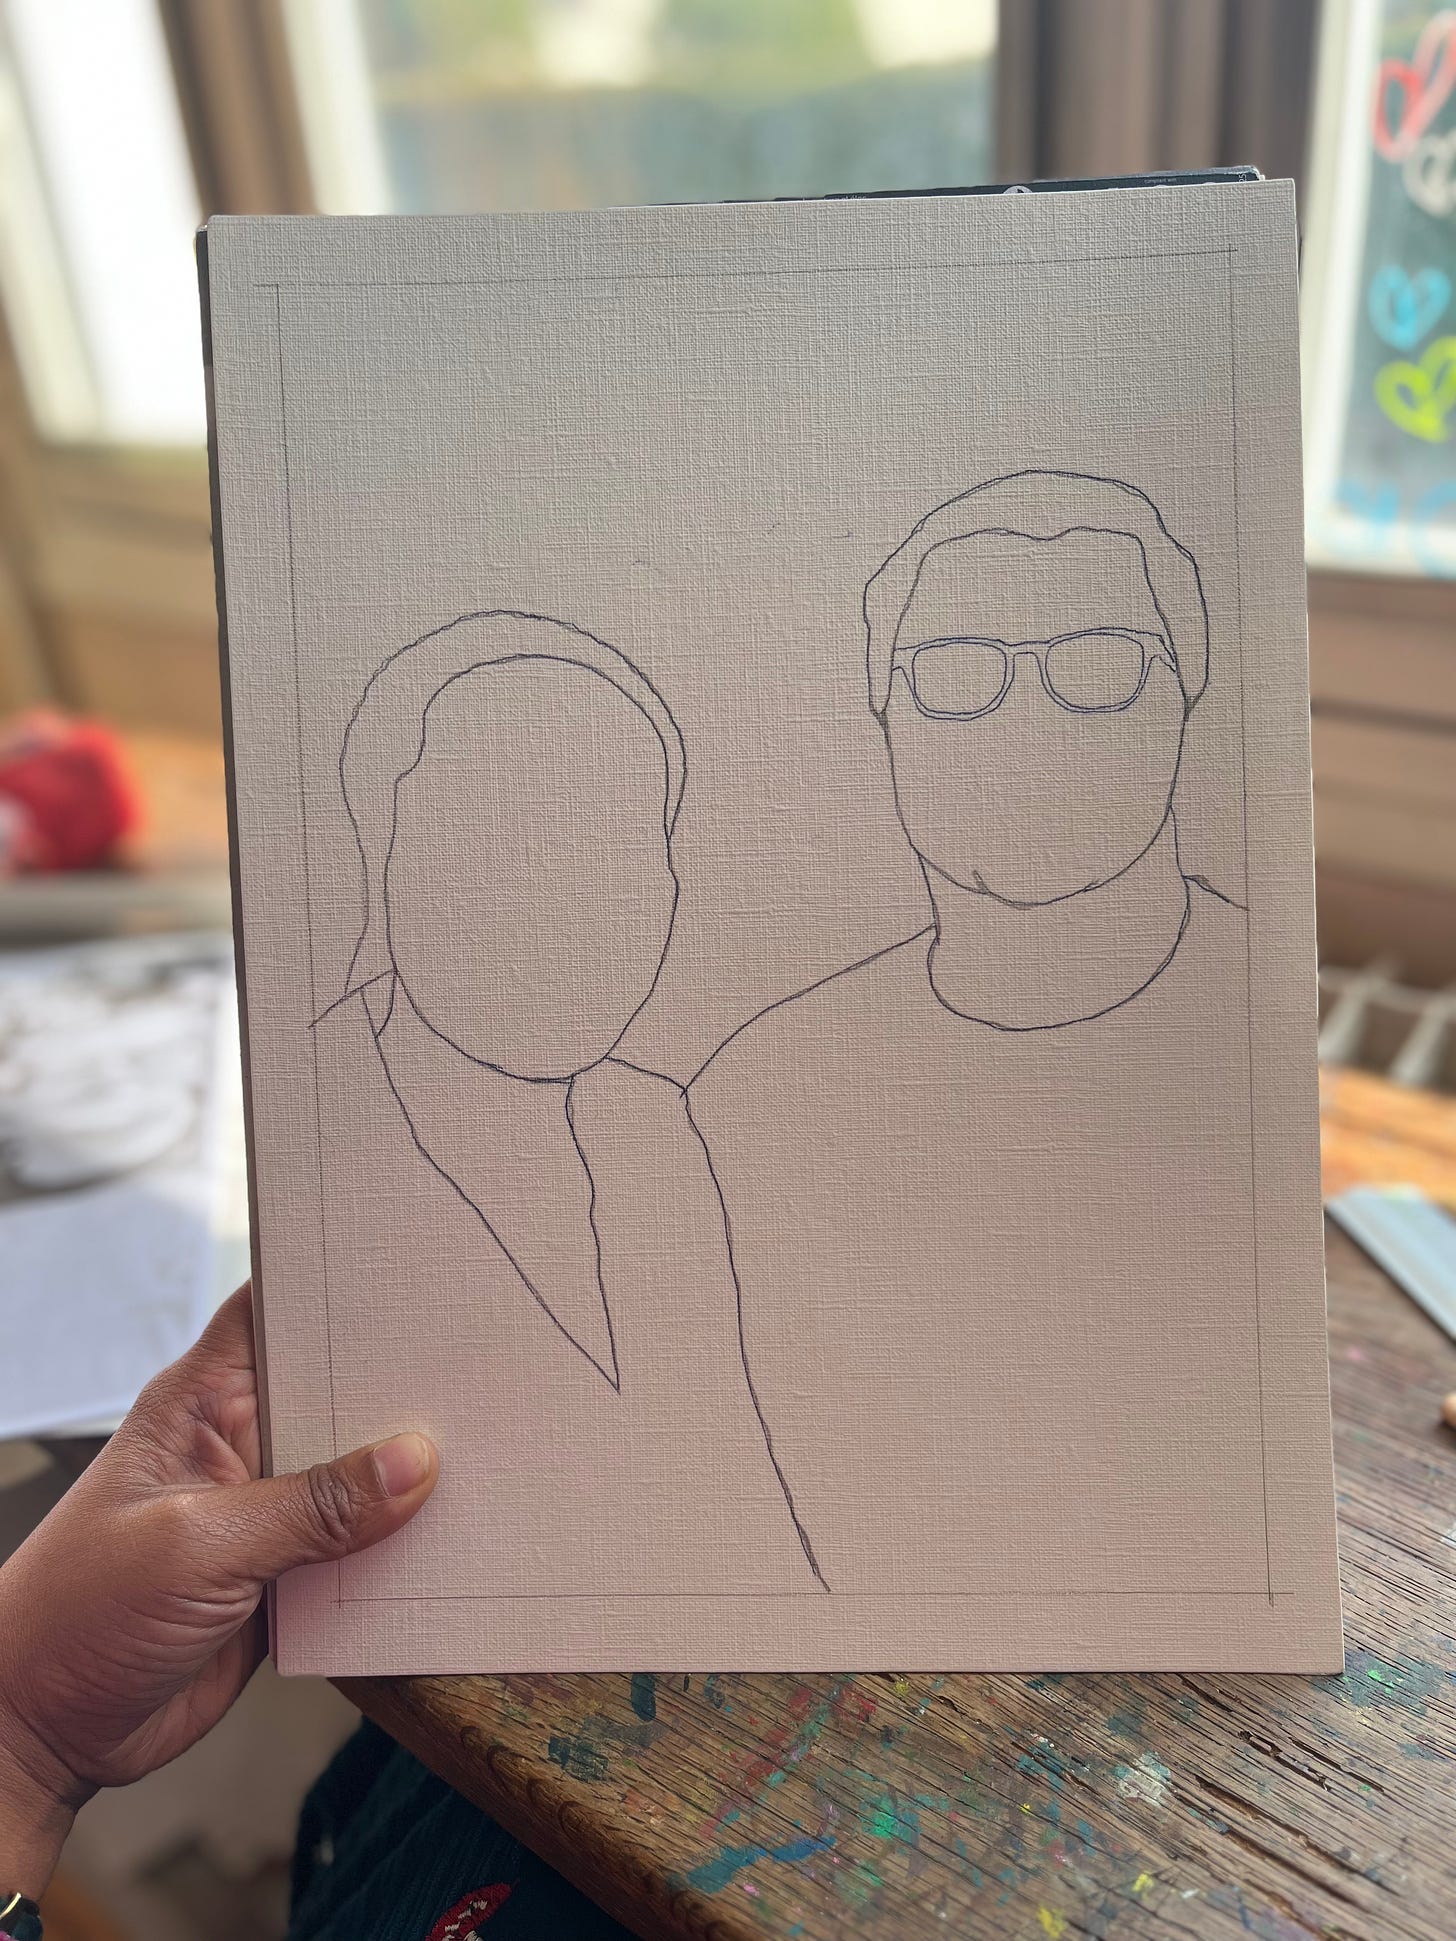 A black hand holding a drawing of a couple's faceless portrait